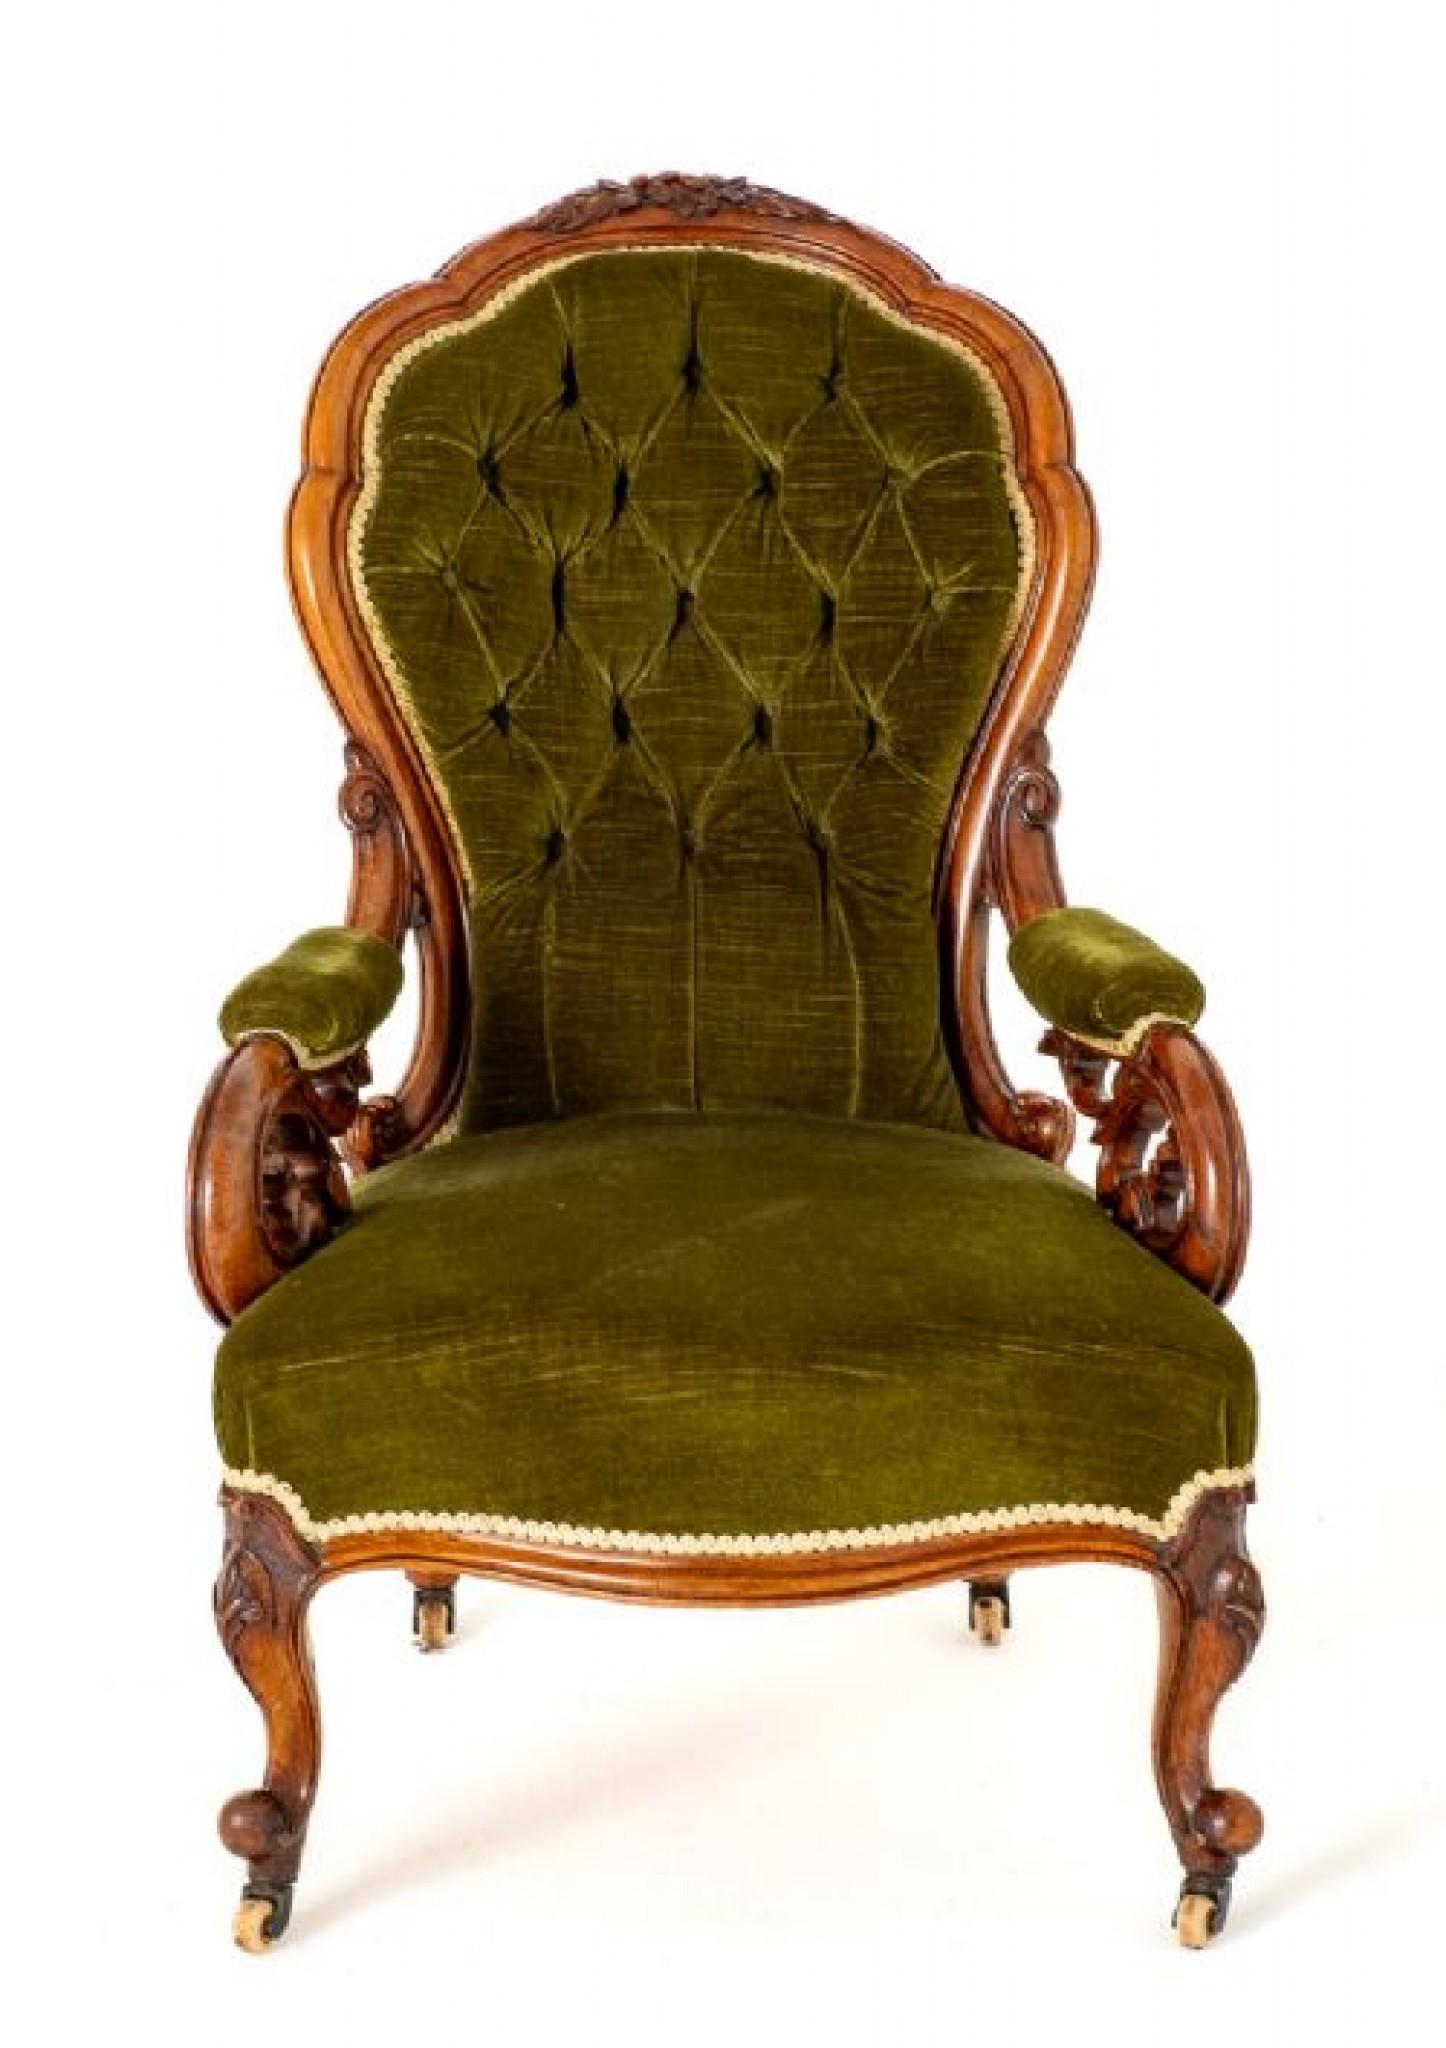 Victorian Walnut Open Arm Chair.
This Arm Chair is Raised upon Cabriole Legs with Carved Toes and Carved Knees and Retain the Original Porcelain Castors.
Circa 1860
The Swept Arms Having Shaped and Carved Detail and Padded Elbow Supports.
The Shaped